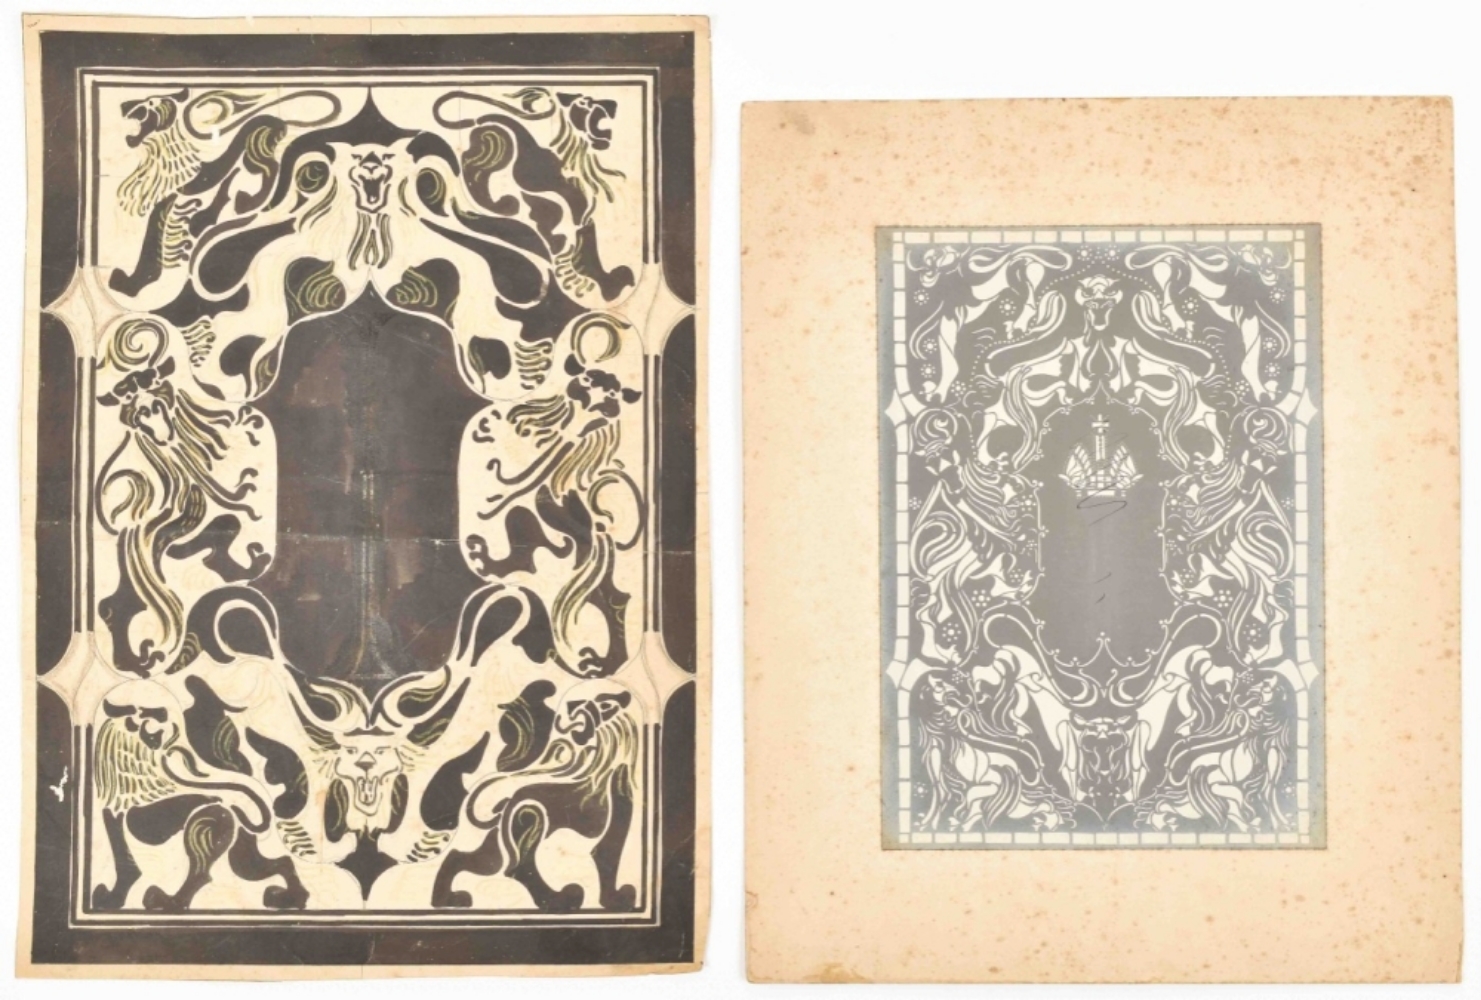 C.A. Lion Cachet (1864-1945) Three drawings: Design for a book binding